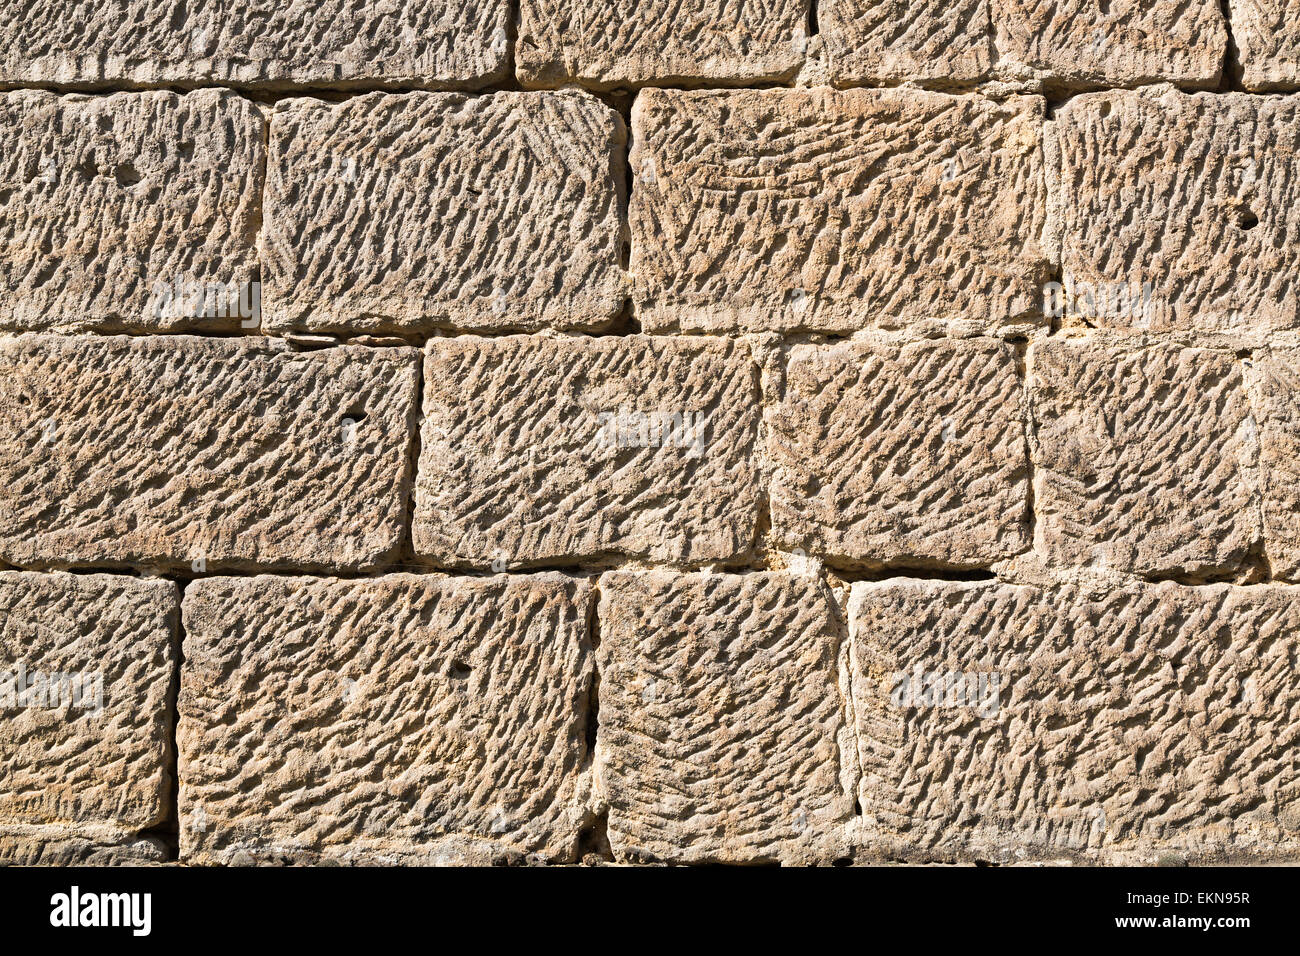 Sandstone wall background, sandstone wall of large blocks Stock Photo